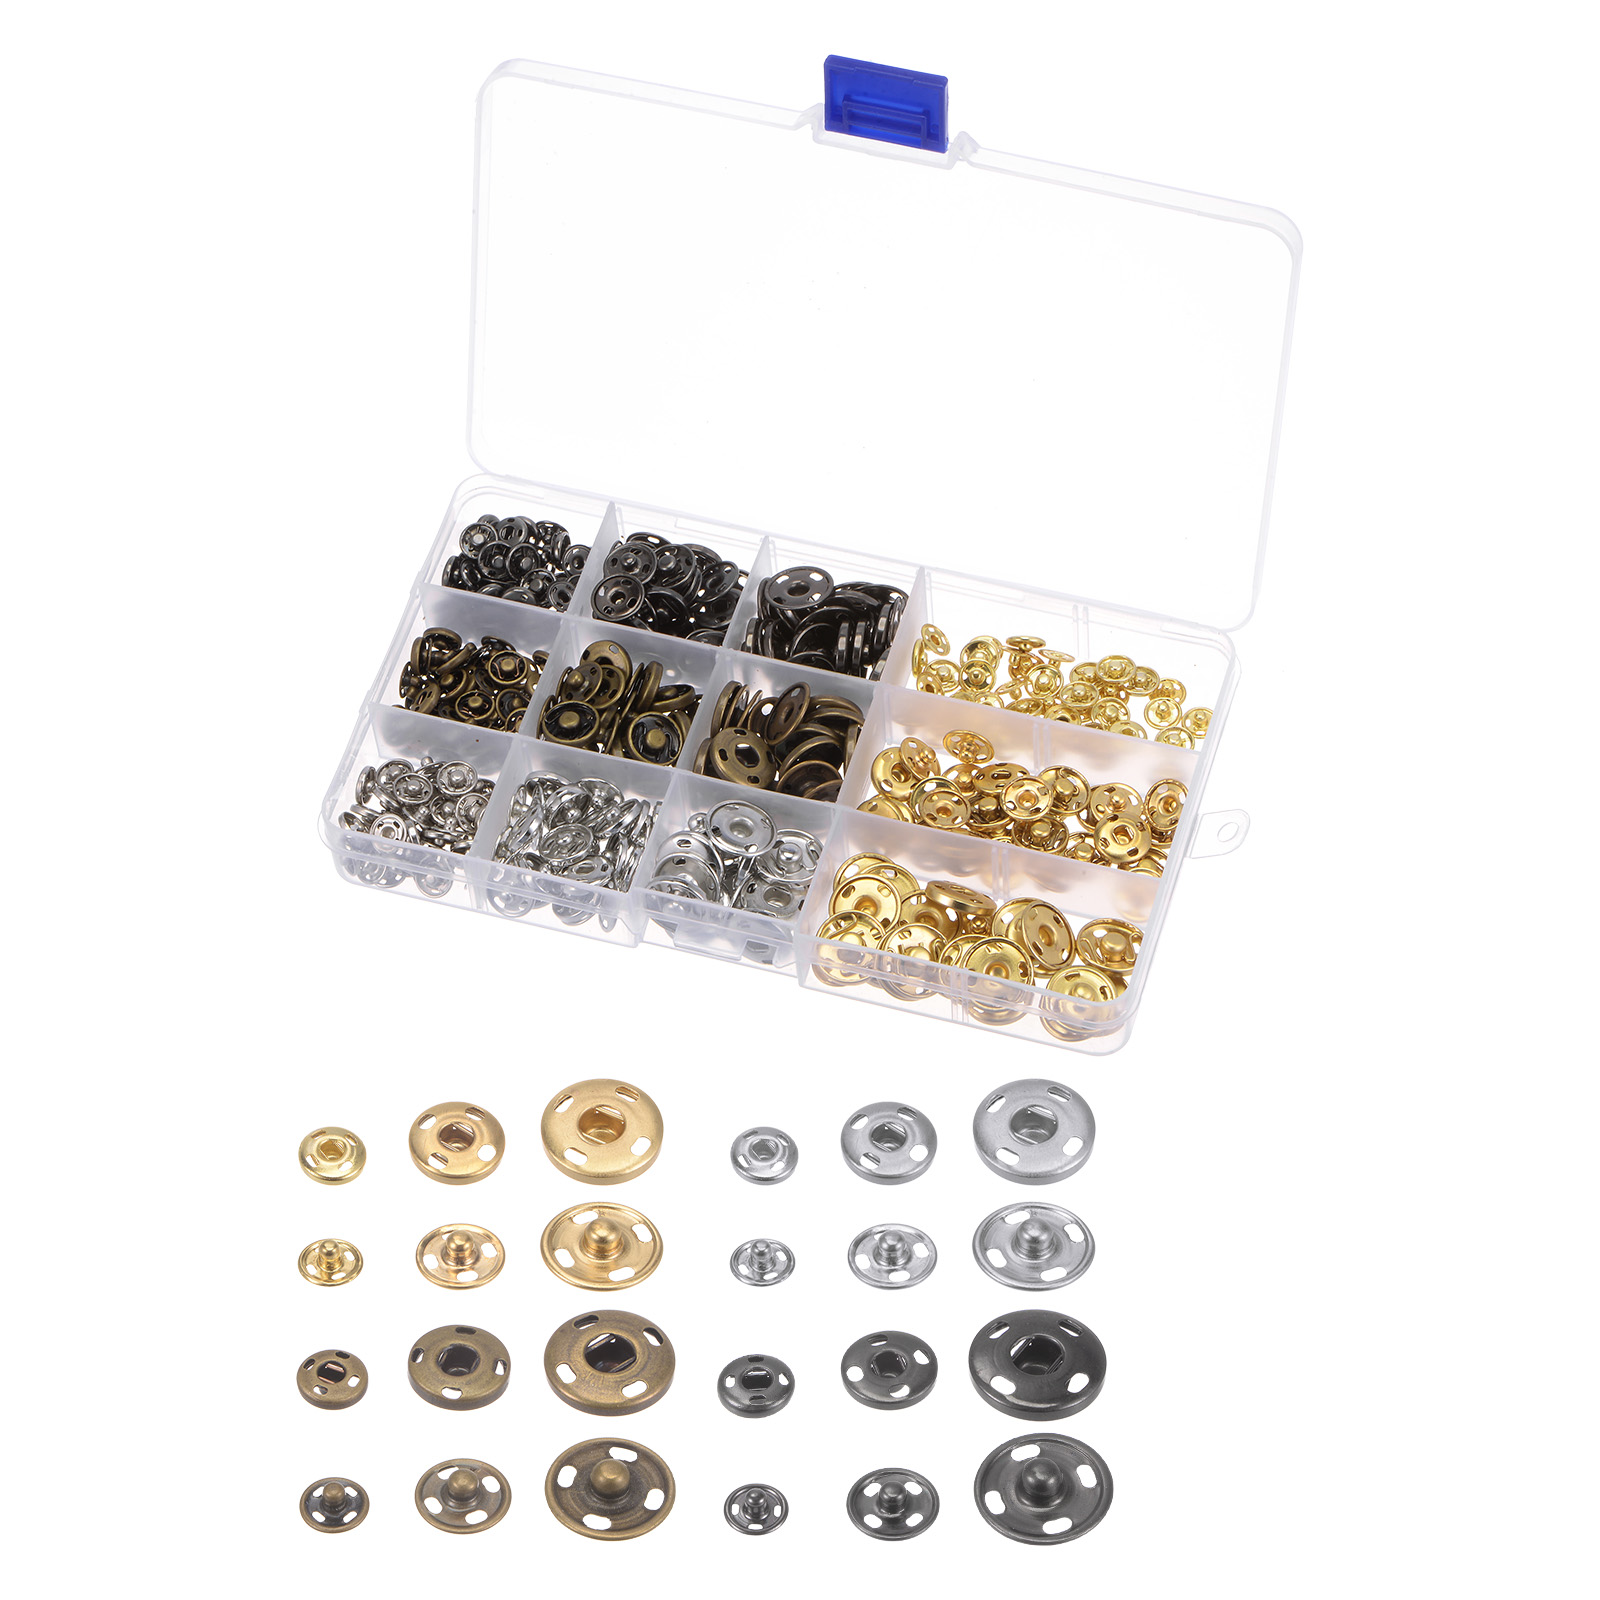 Unique Bargains 180 Sets Sew-on Snap Buttons 9mm 12mm 15mm Snap Fasteners for Sewing